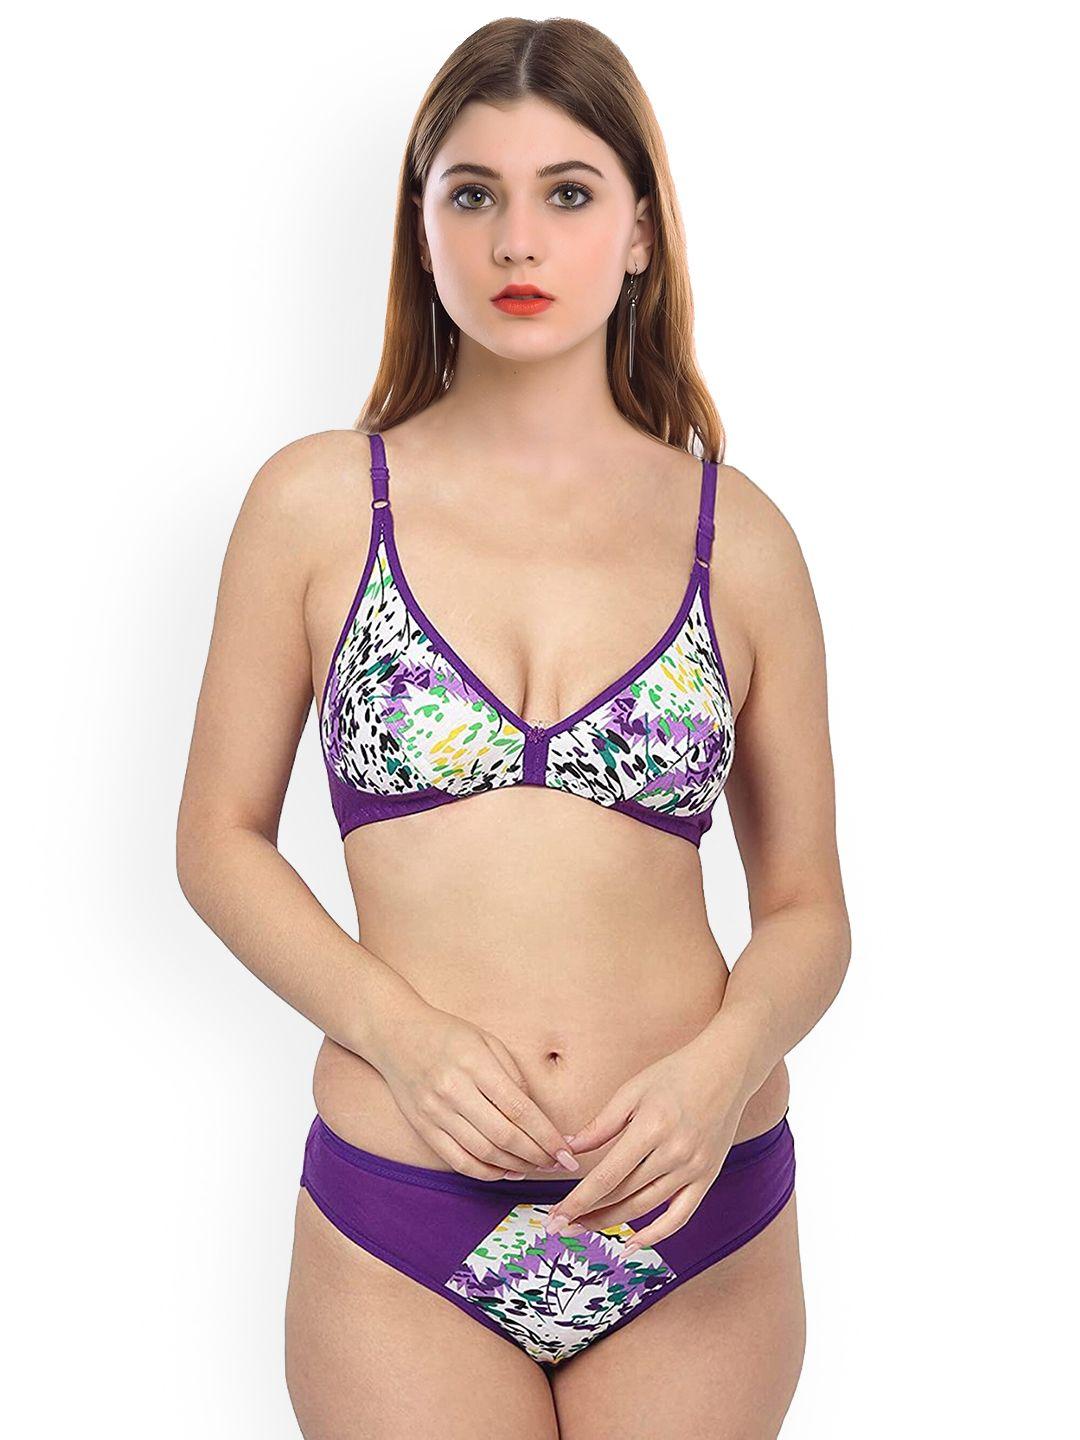 arousy printed cotton lingerie set by_tiger set_purple_36